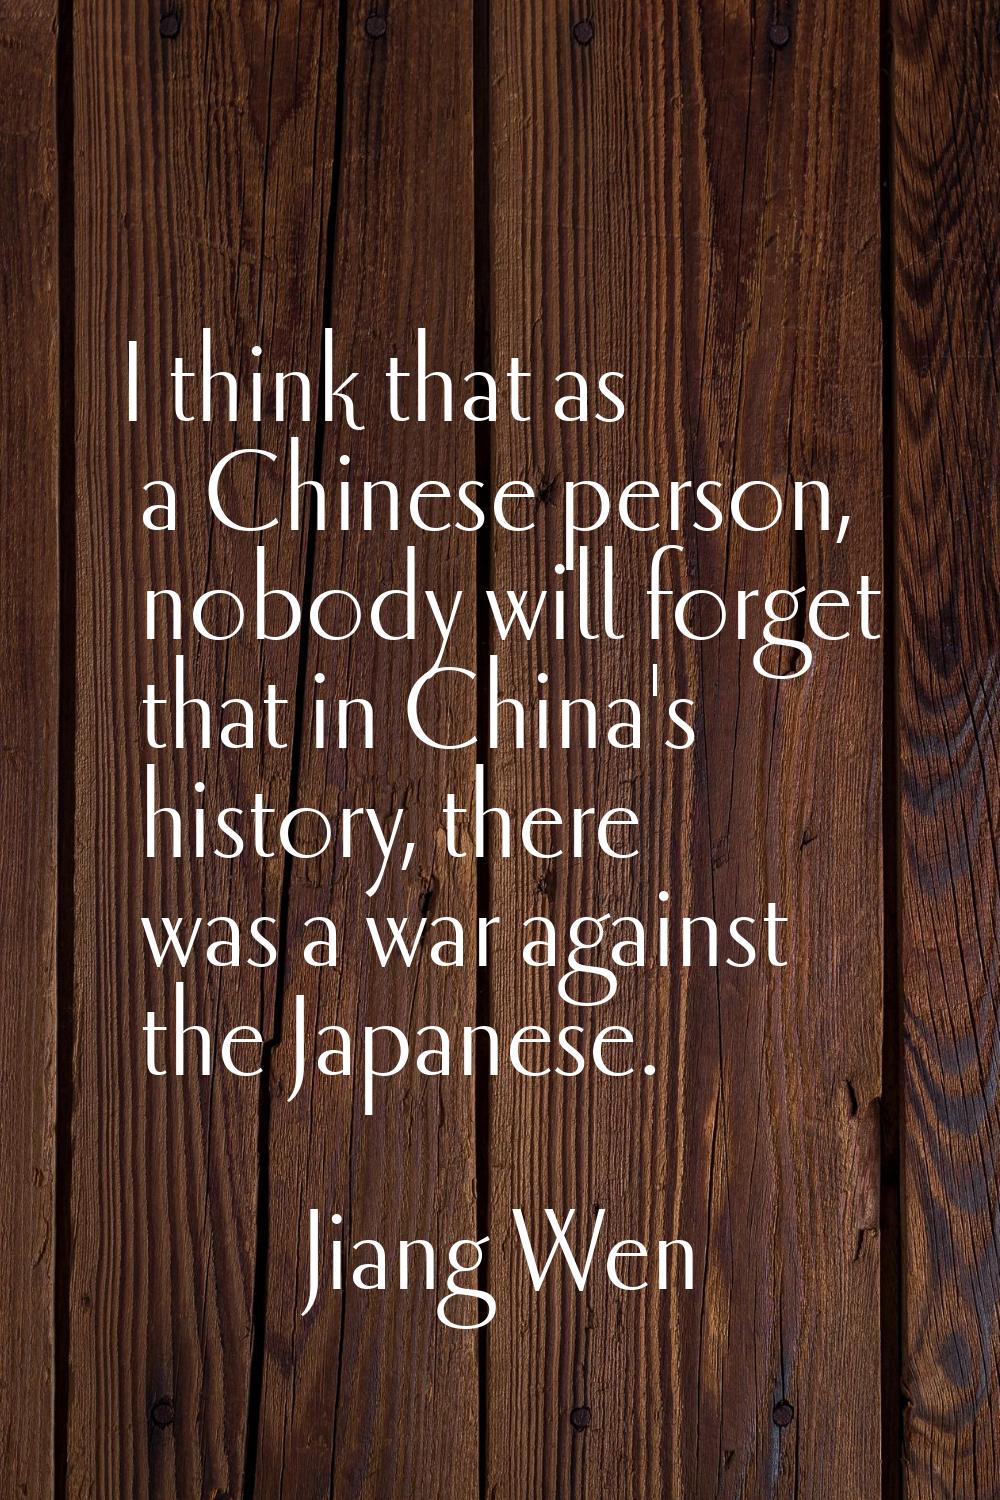 I think that as a Chinese person, nobody will forget that in China's history, there was a war again